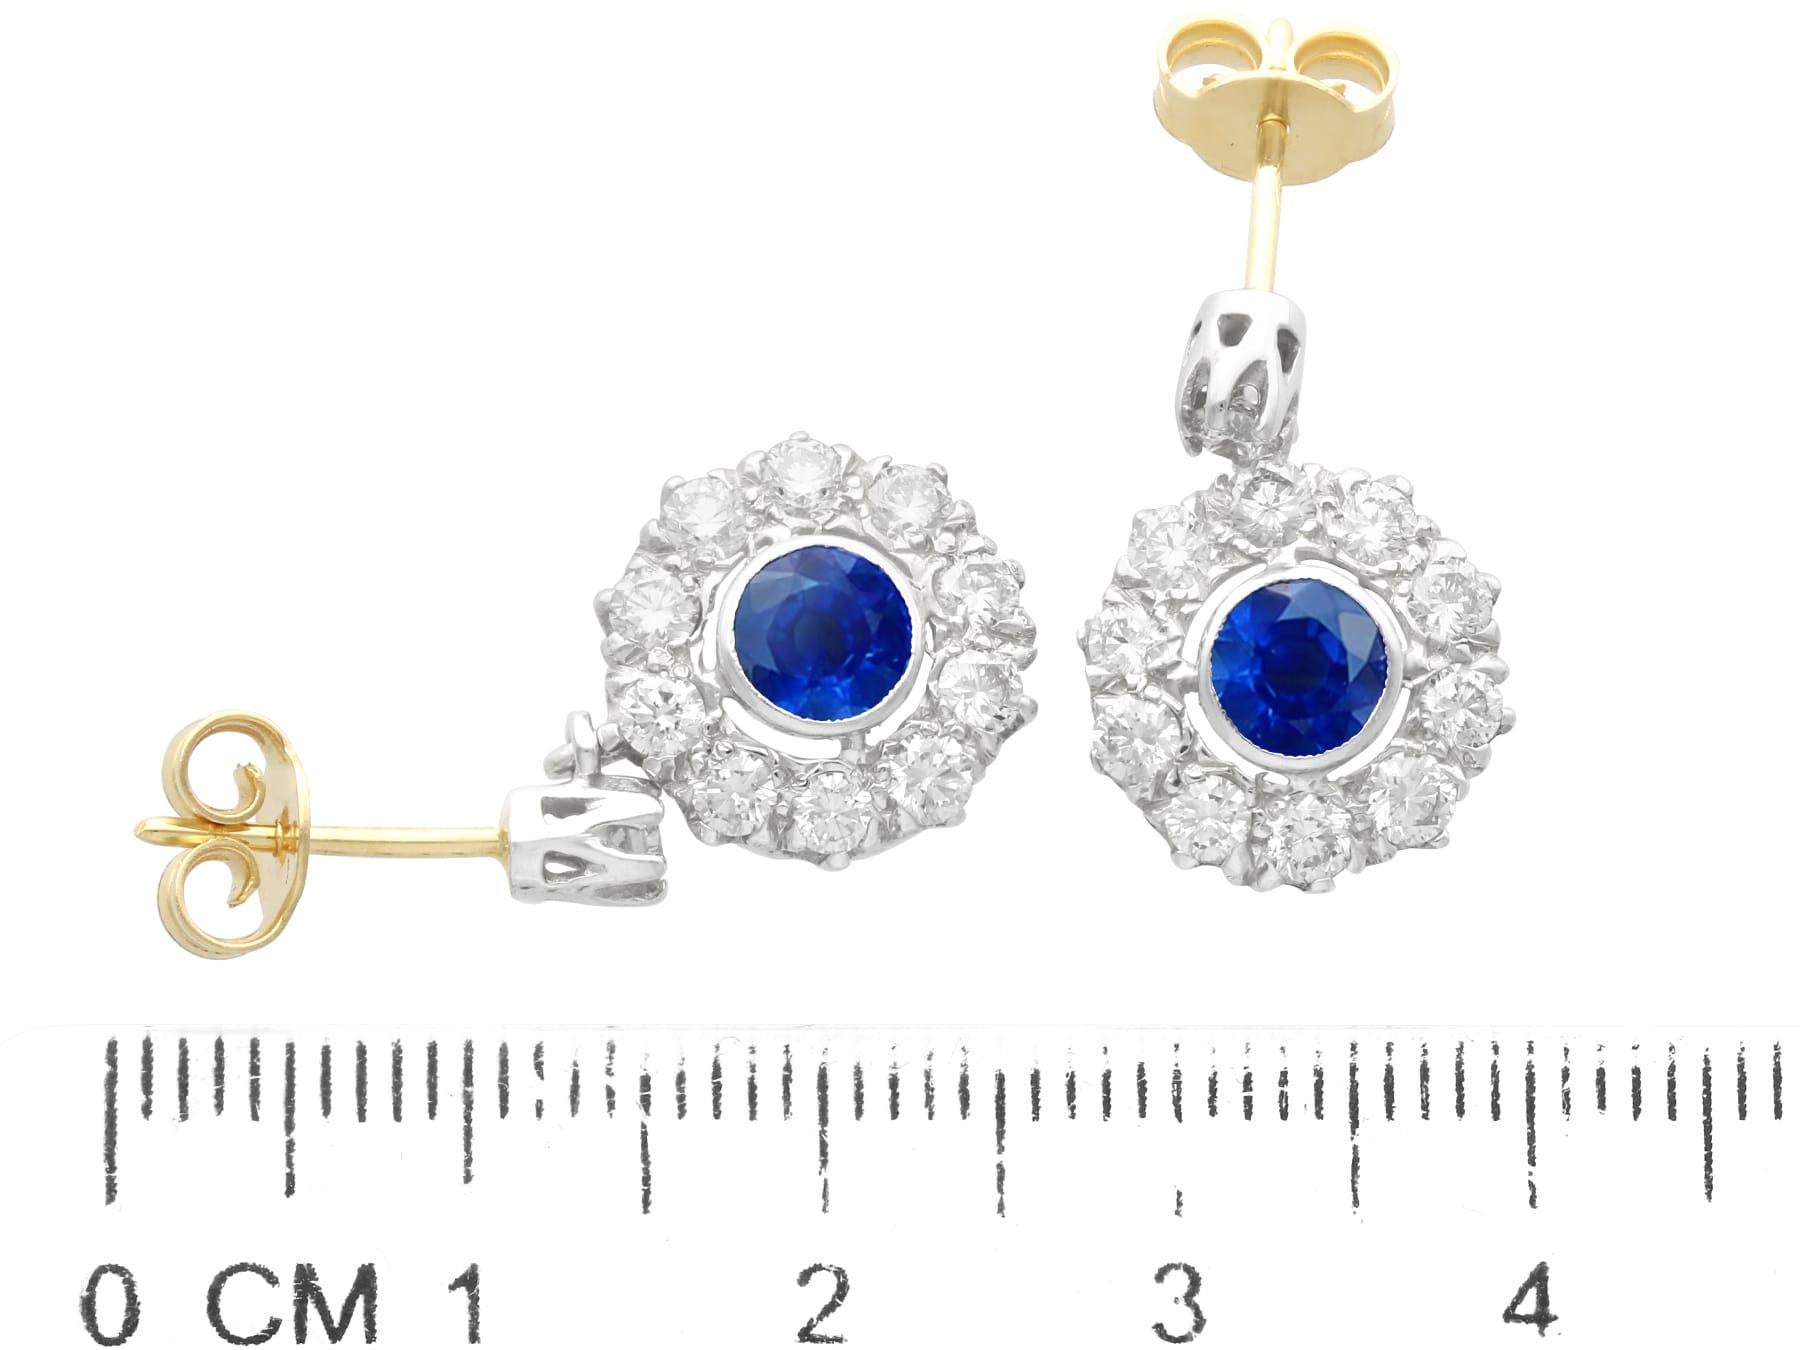 Antique 1 Carat Sapphire and 1.98 Carat Diamond 18k Yellow Gold Drop Earrings For Sale 1